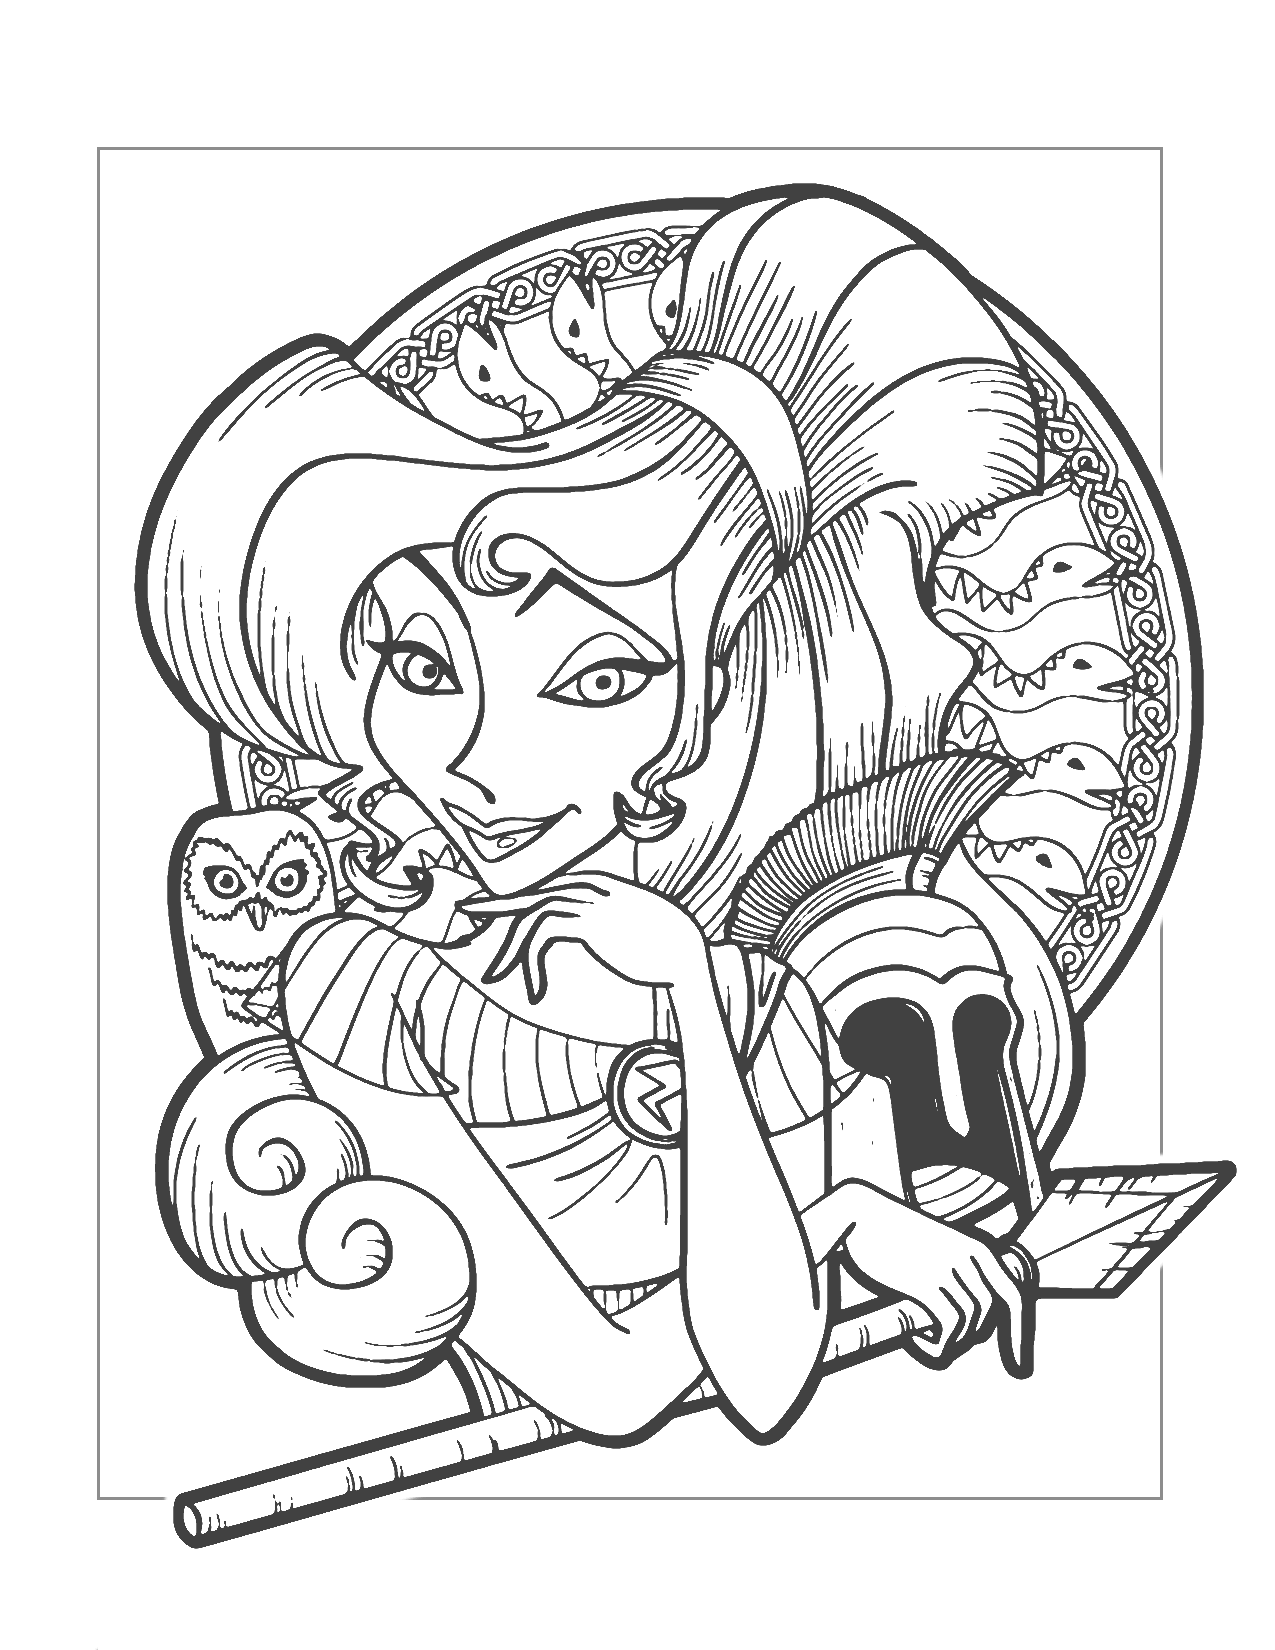 Meg From Hercules Coloring Page For Adults